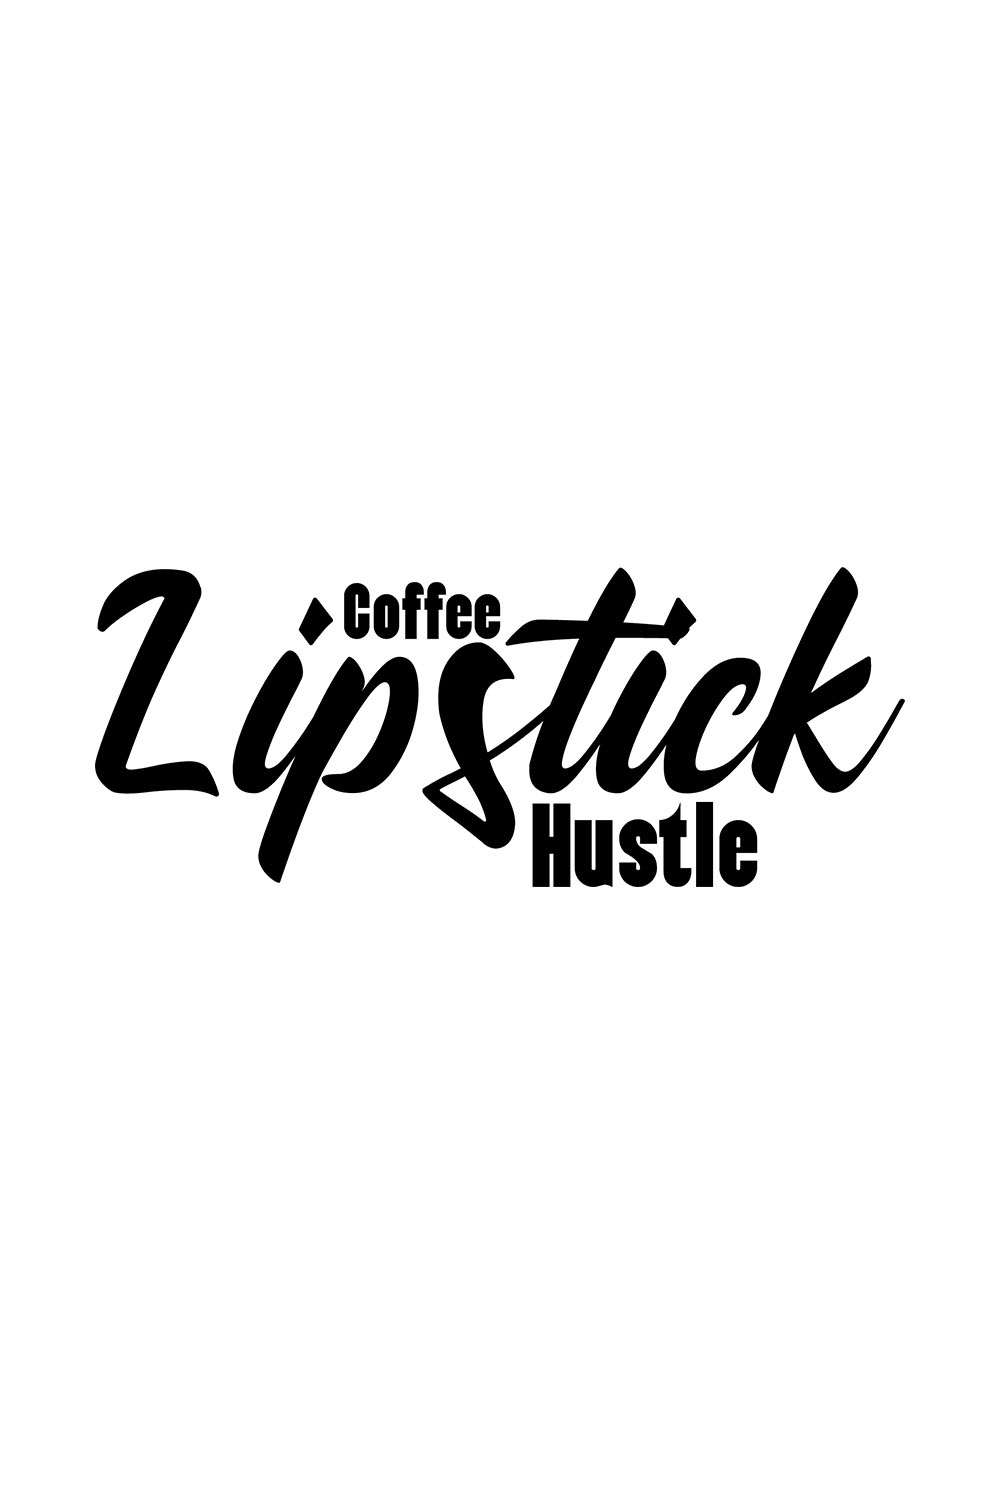 Image with charming black lettering for Coffee Lipstick Hustle prints.